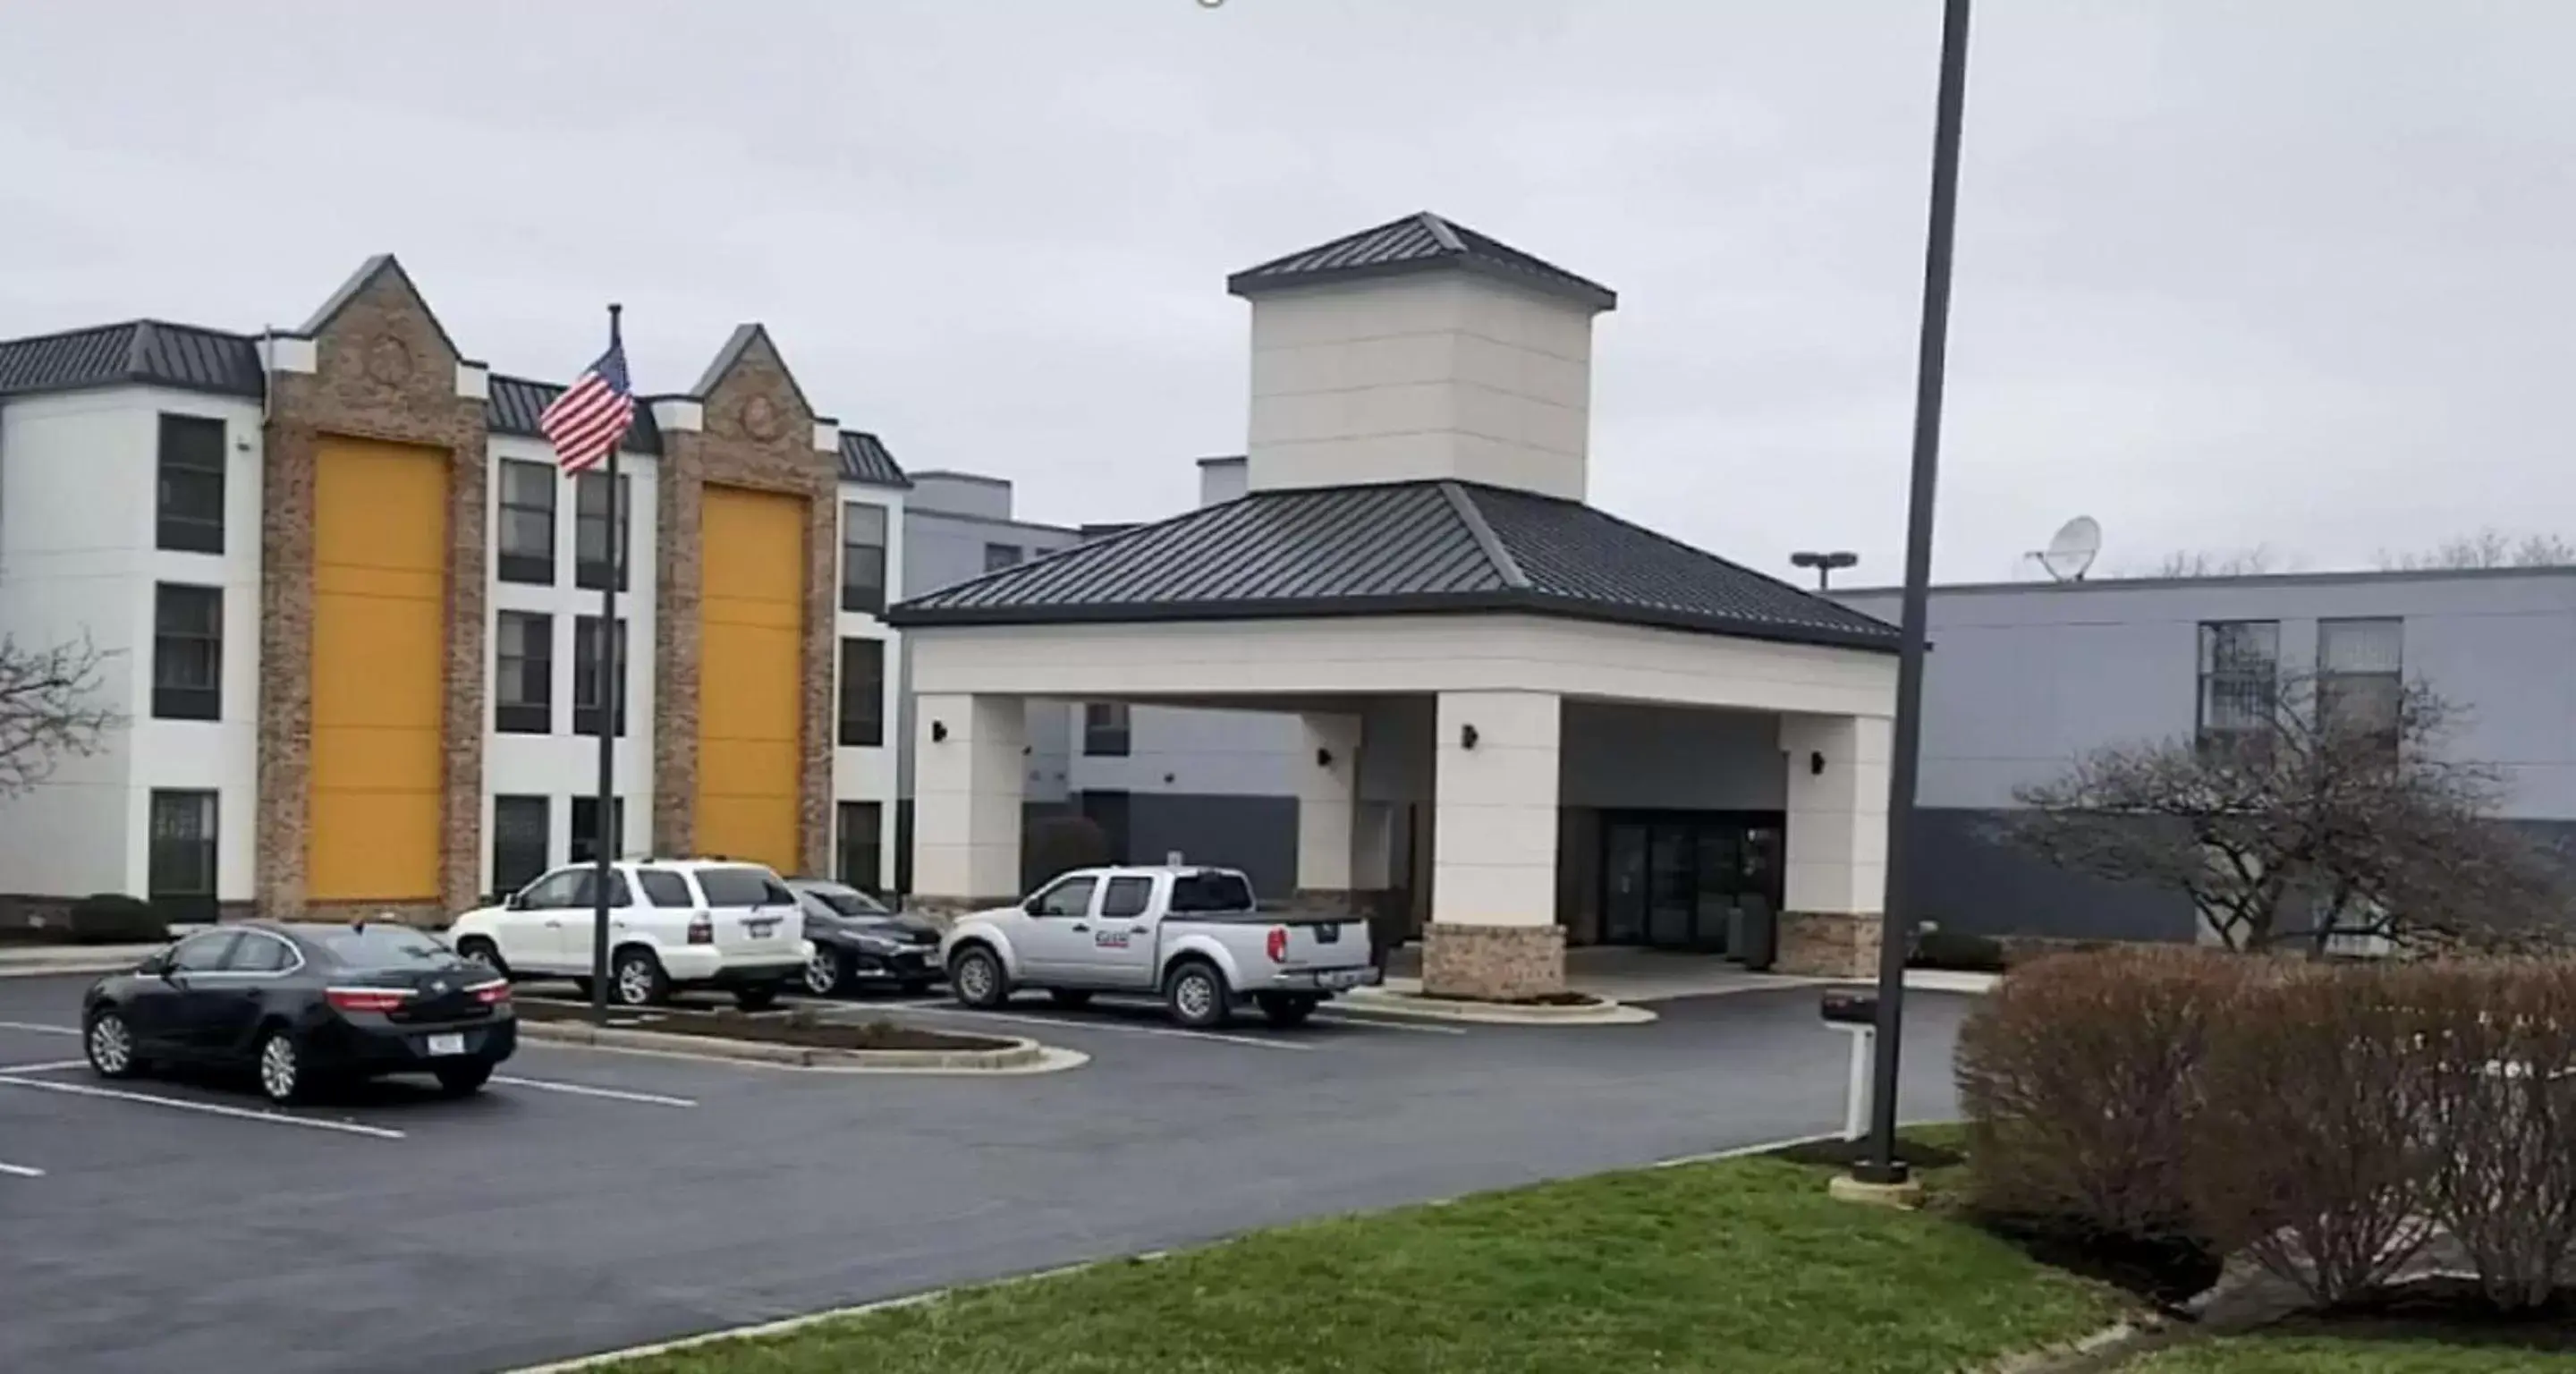 Property Building in Best Western Fishers Indianapolis